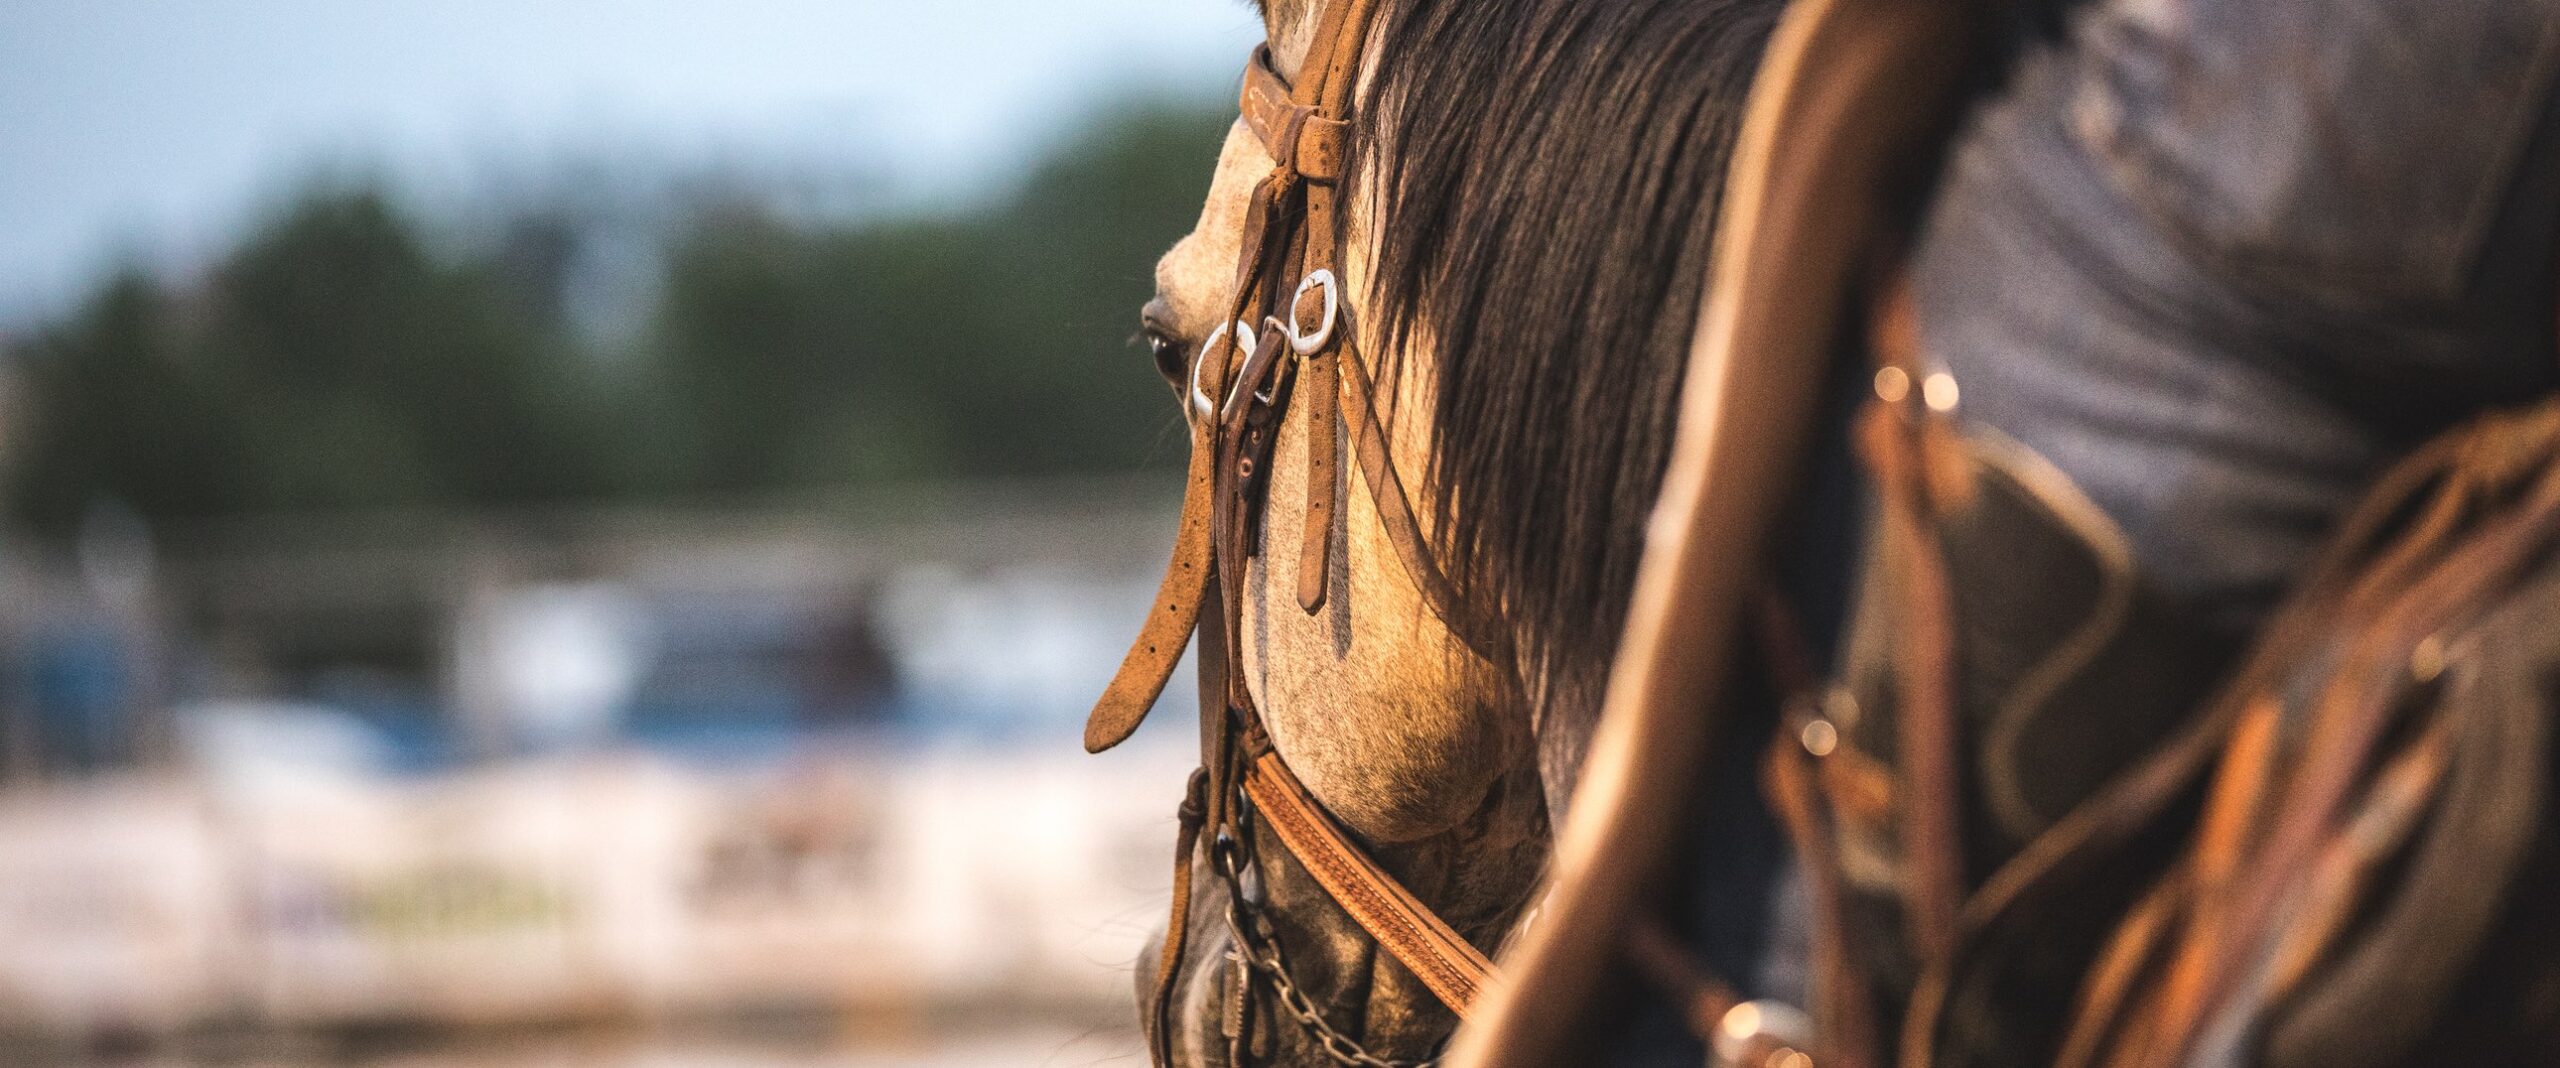 In this intimate portrait, a close-up photo captures the side of a horse's face, revealing the rich brown mane and soulful eye.